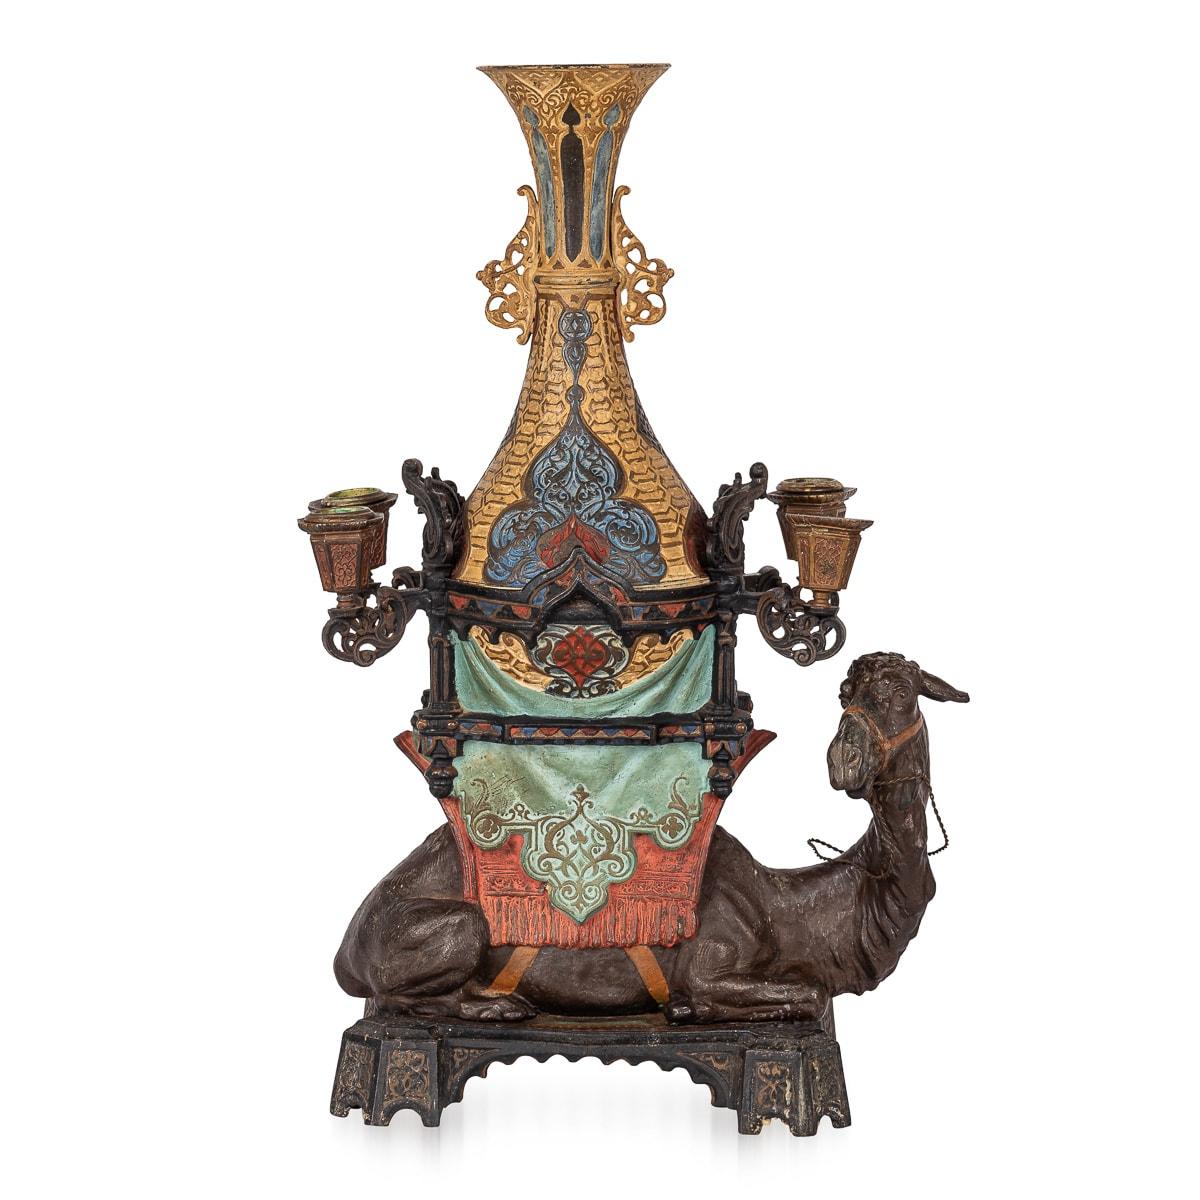 Antique late 19th Century Austrian ornate and unusual candelabra of solid metal construction, cold painted throughout. The design features a majestic kneeling camel supporting a large vase, mounted with four candlesticks to all sides. The design is